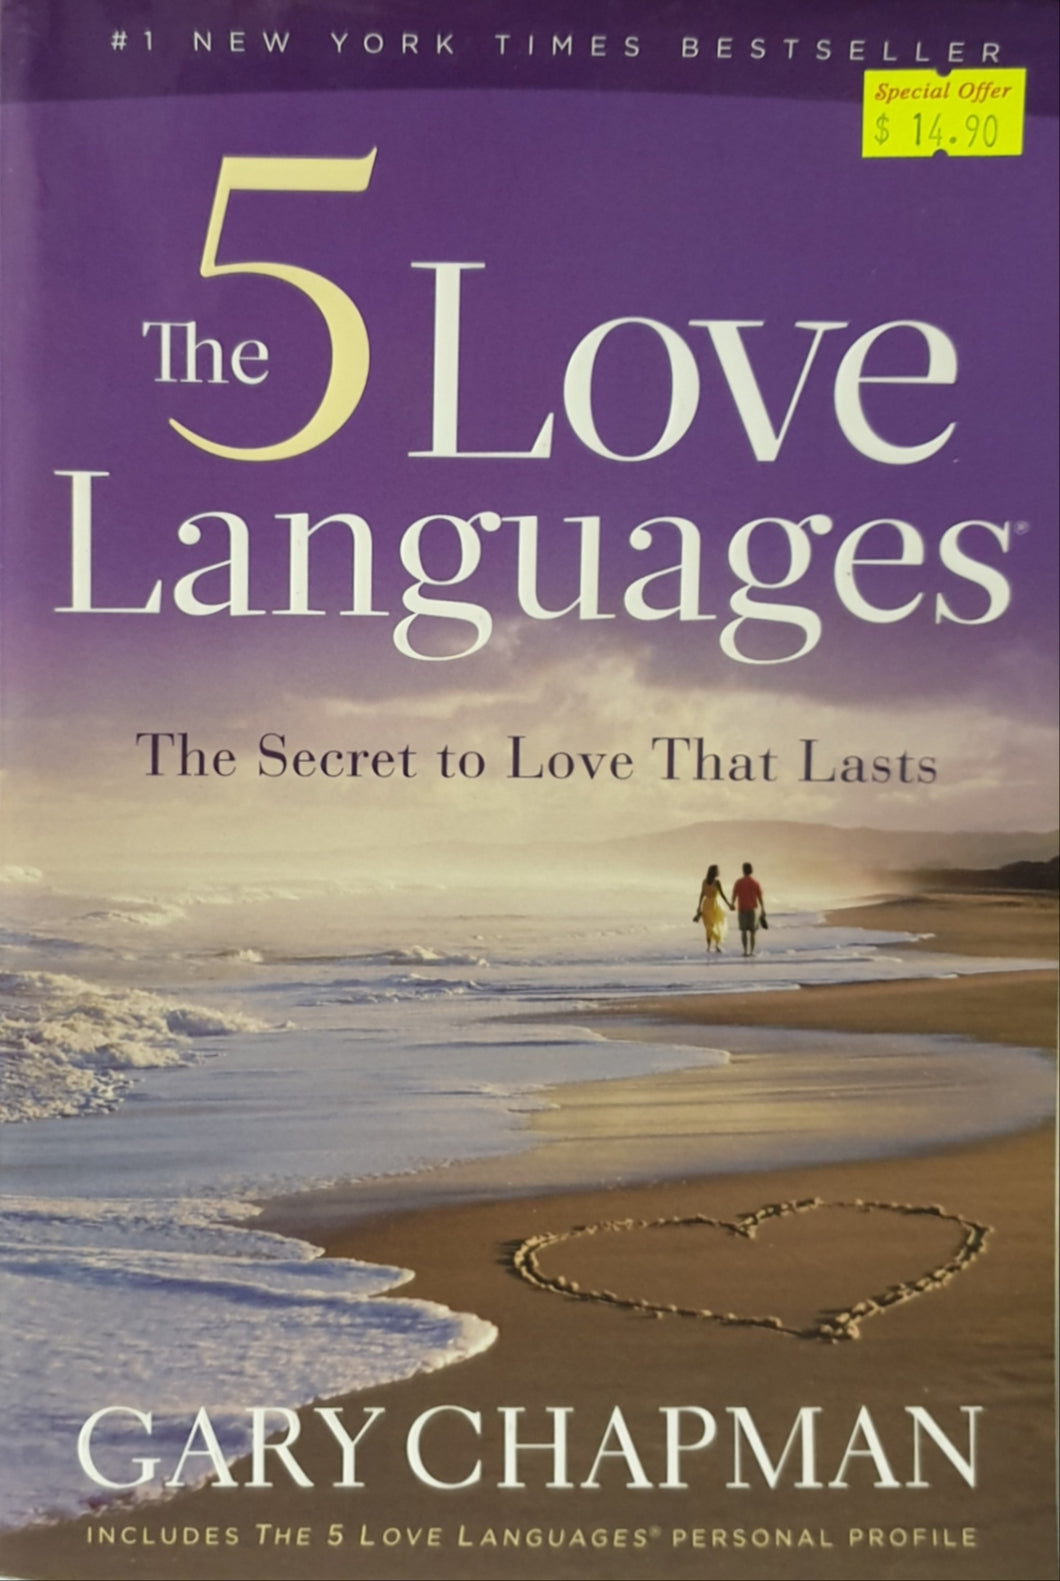 The Five Love Languages : The Secret to Love That Lasts - Gary Chapman